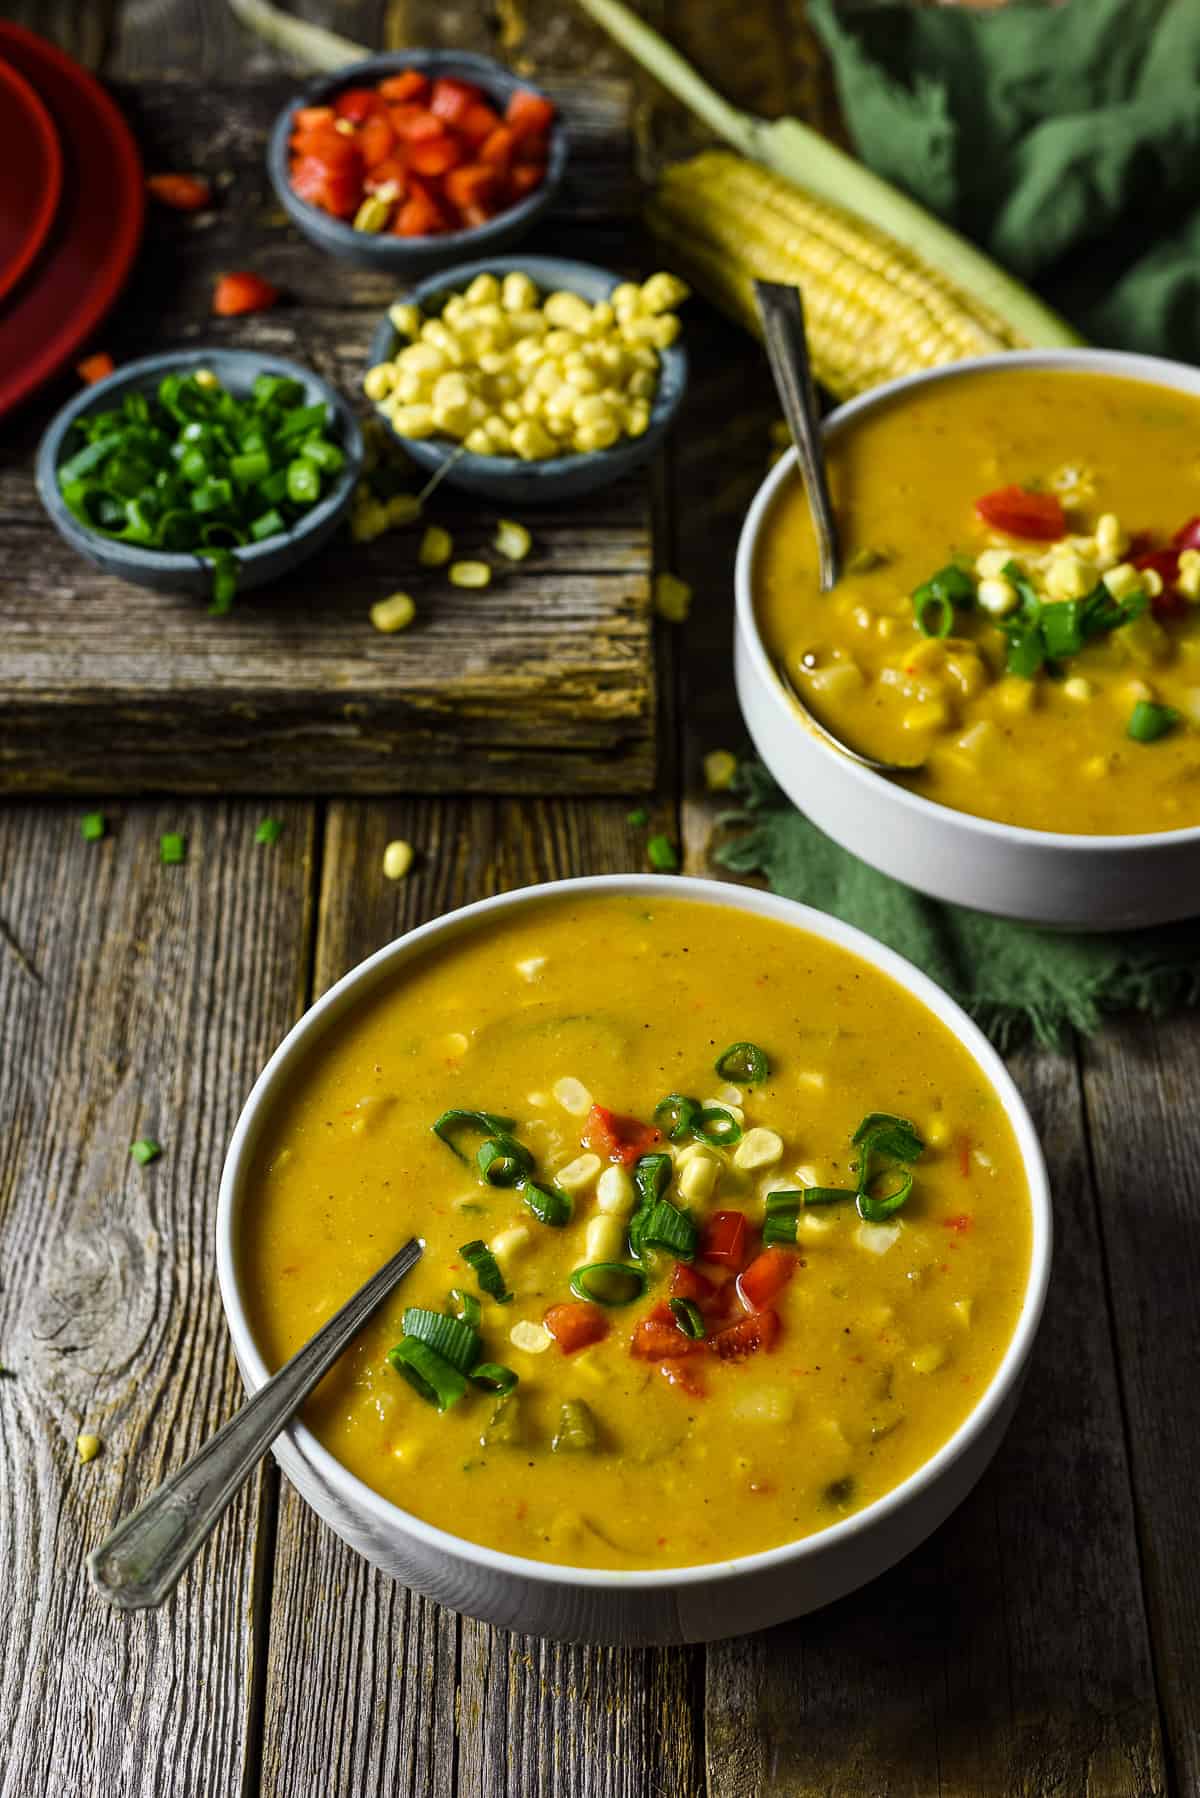 Bowl of corn chowder with corn, onion, and bell pepper garnish.